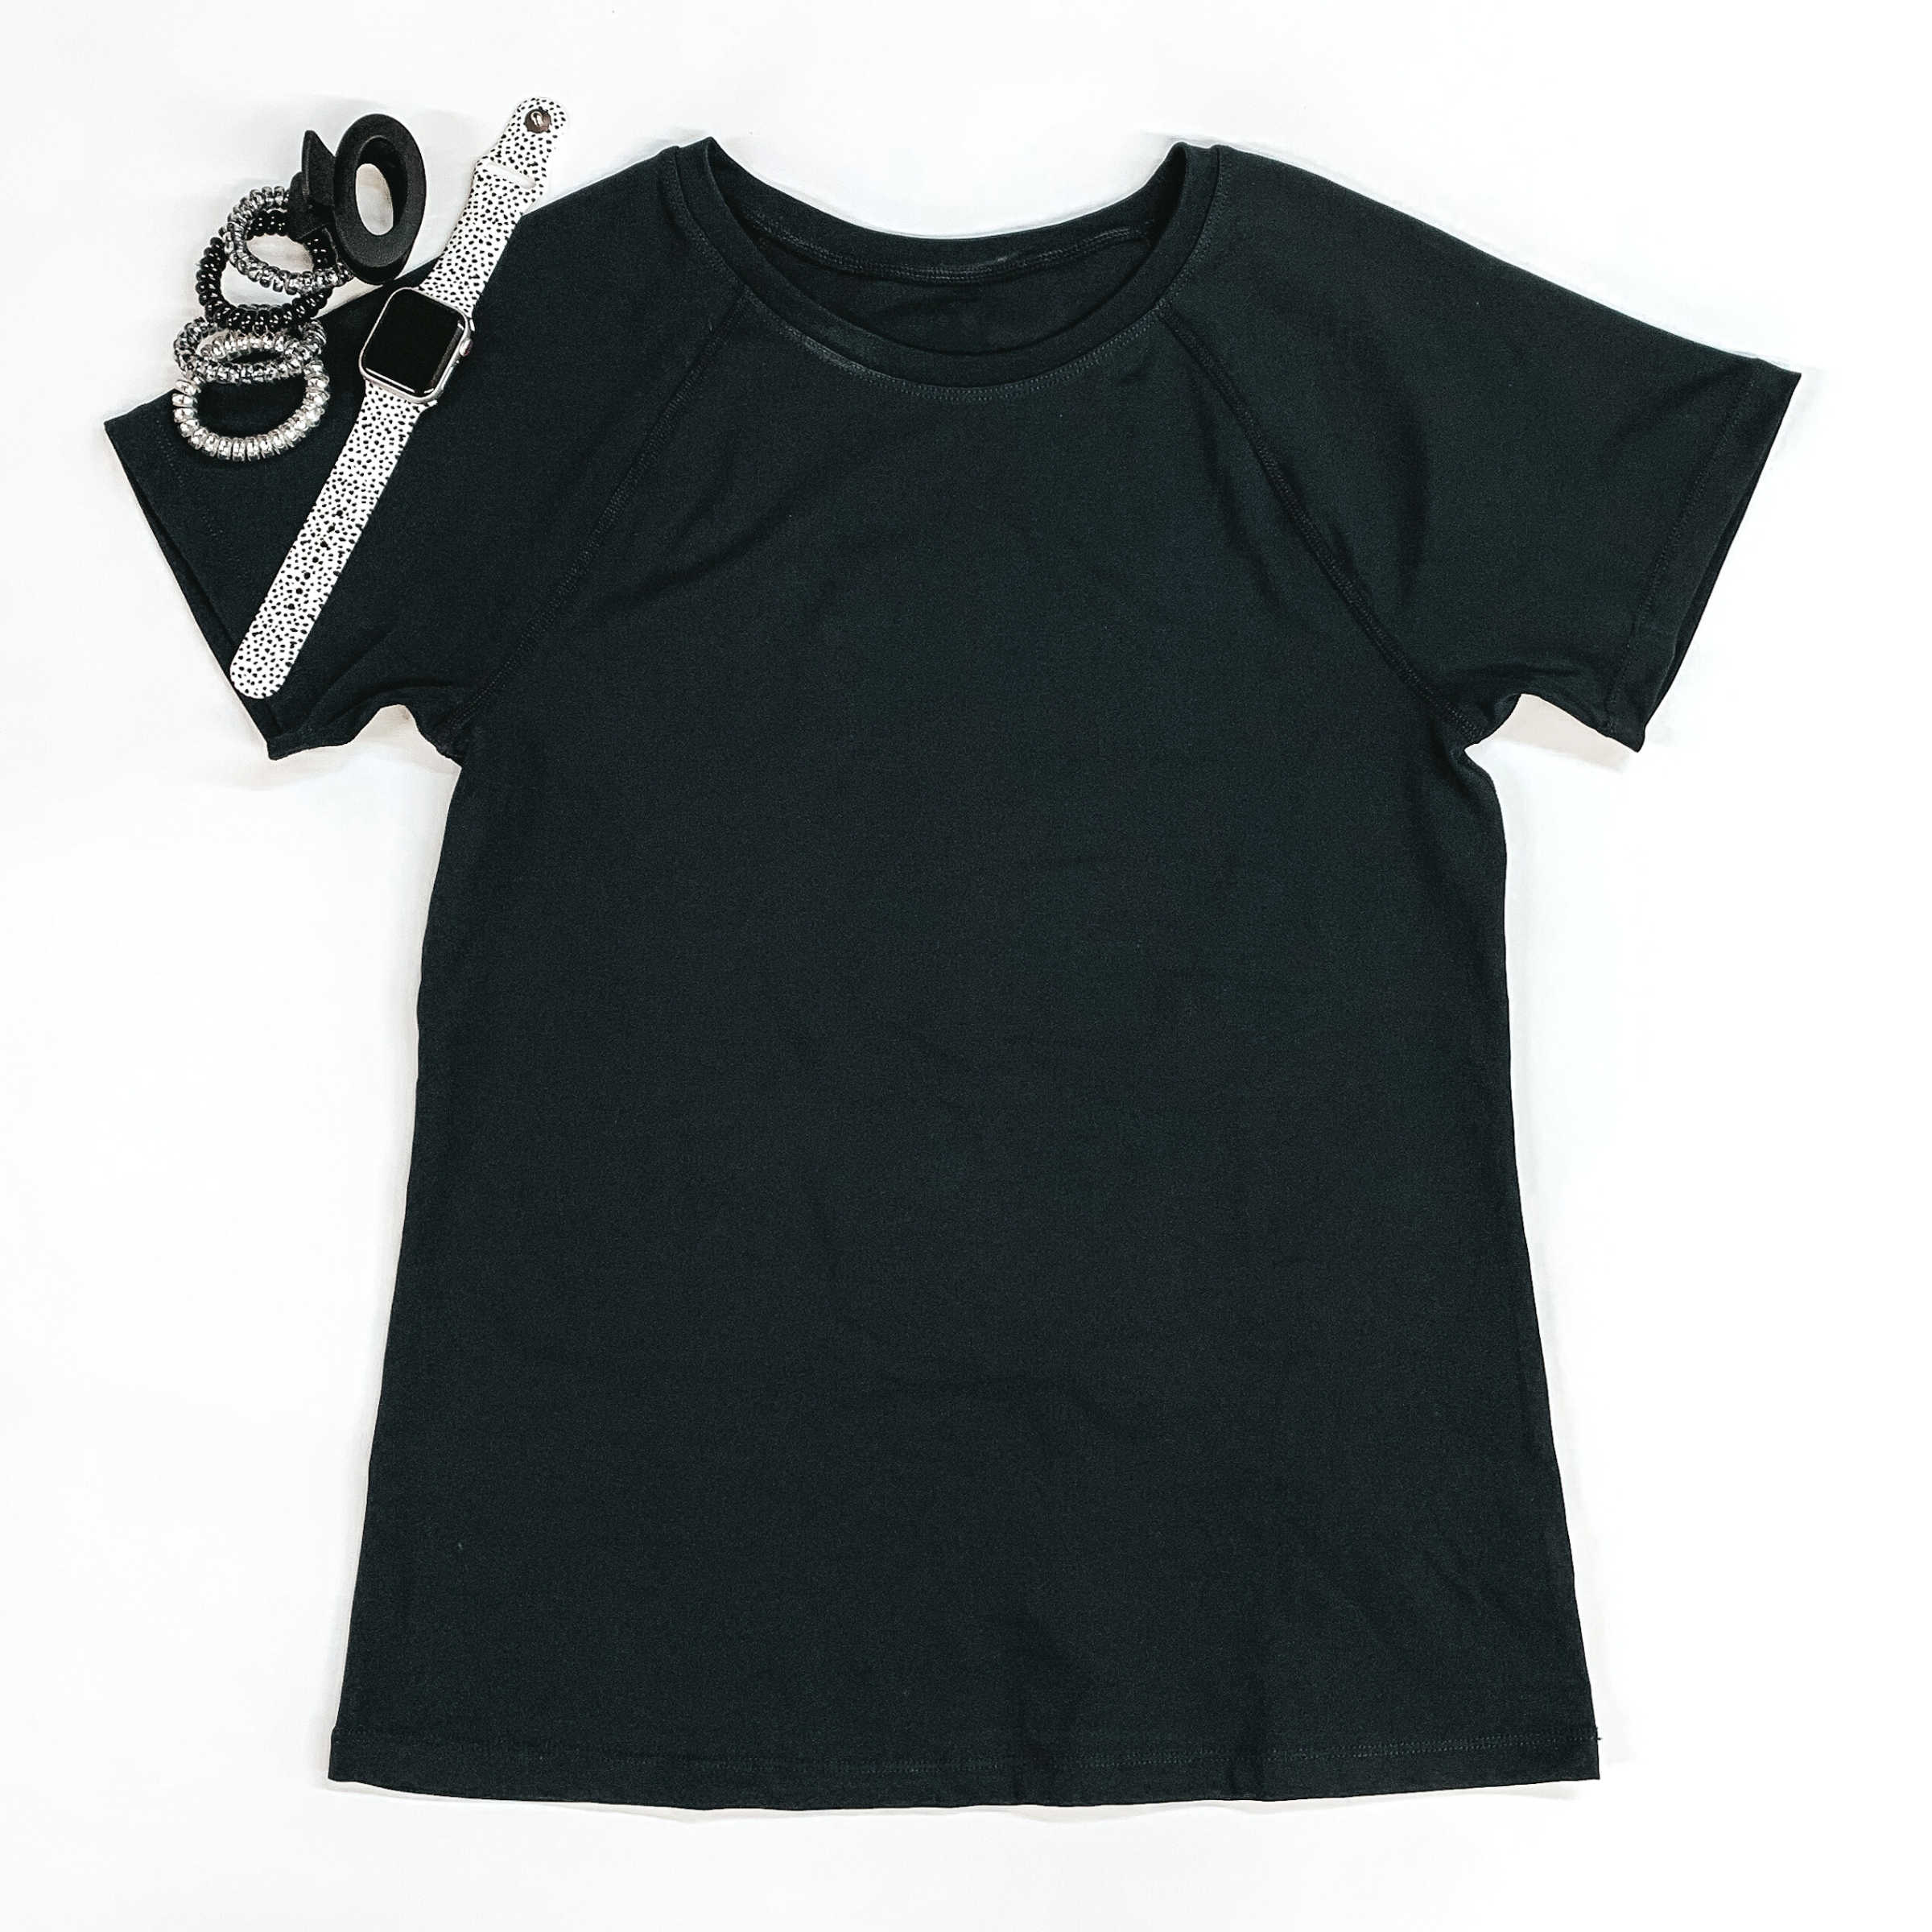 Black shorts sleeve top pictured on a white background with hair ties, a black clip, and a smart watch at the top left corner.